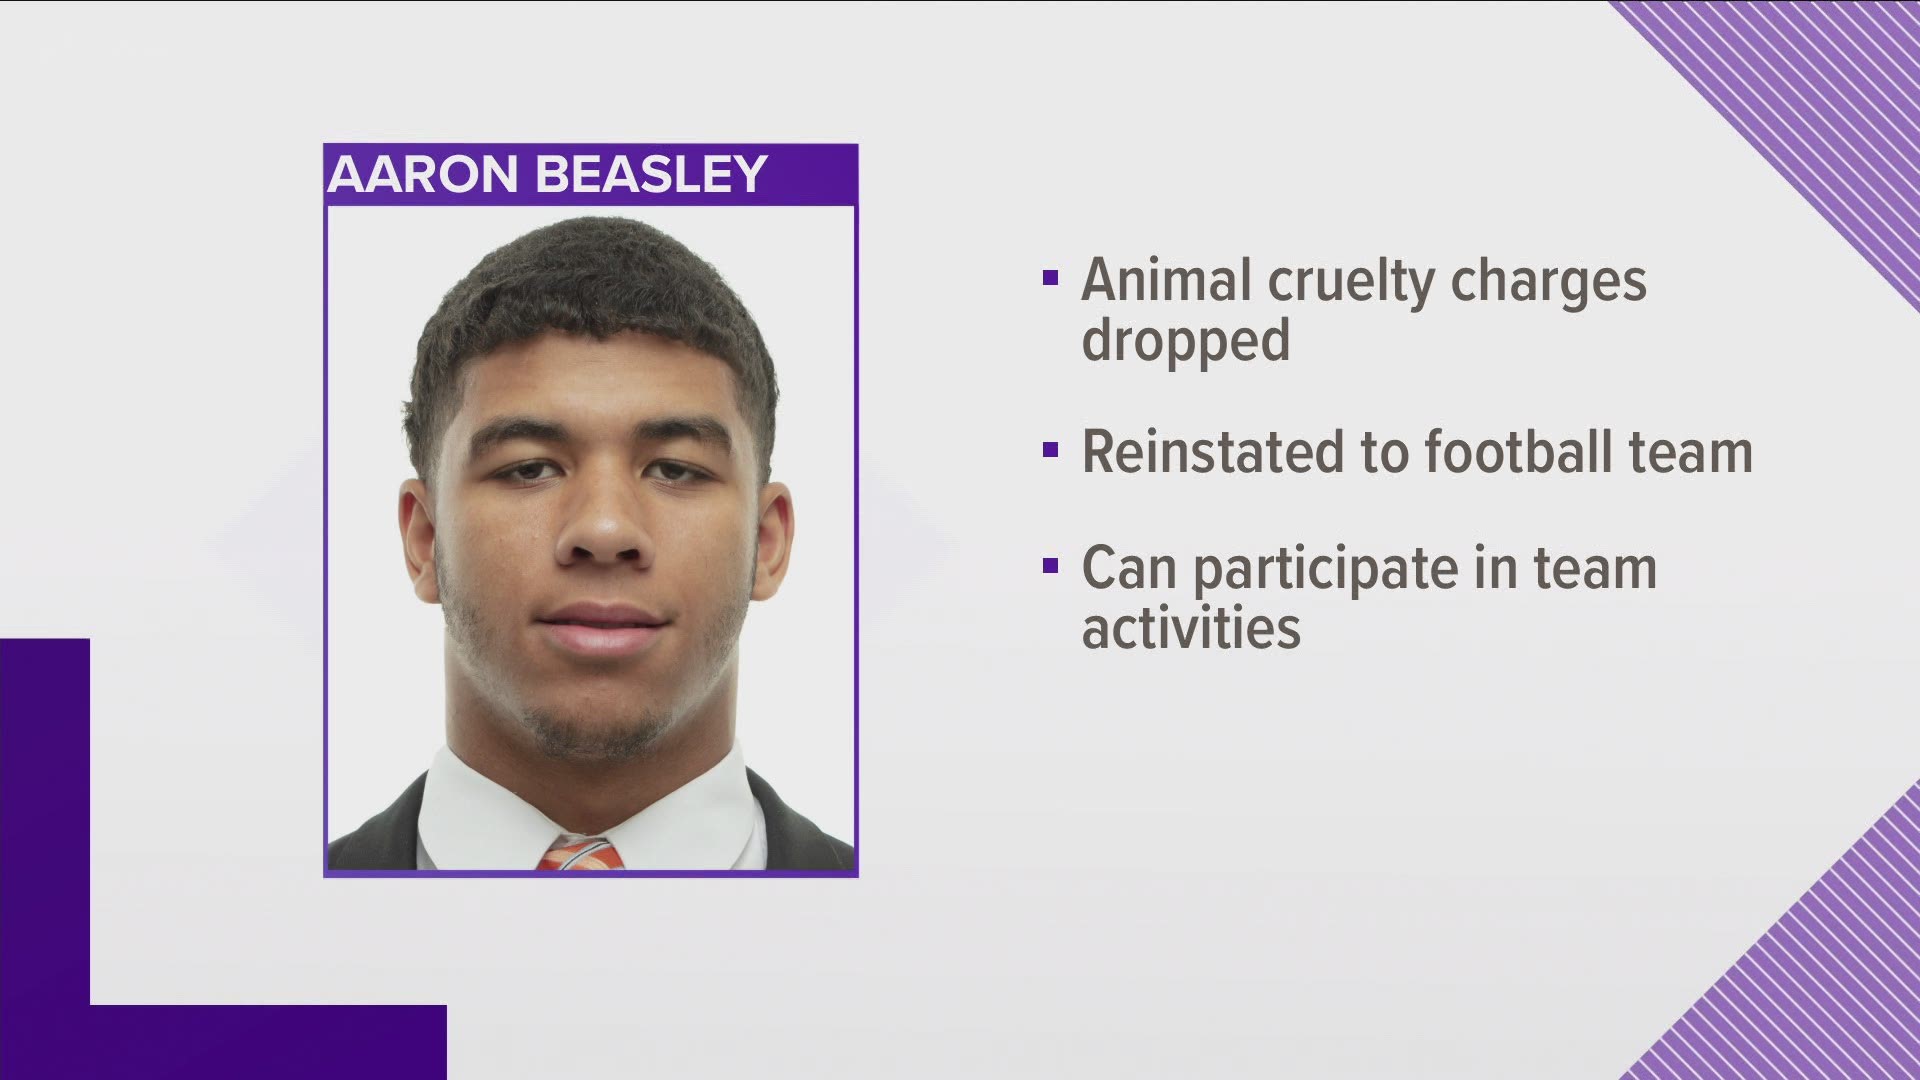 Vol Linebacker Aaron Beasley is back on the football team after charges against him were dropped this week.